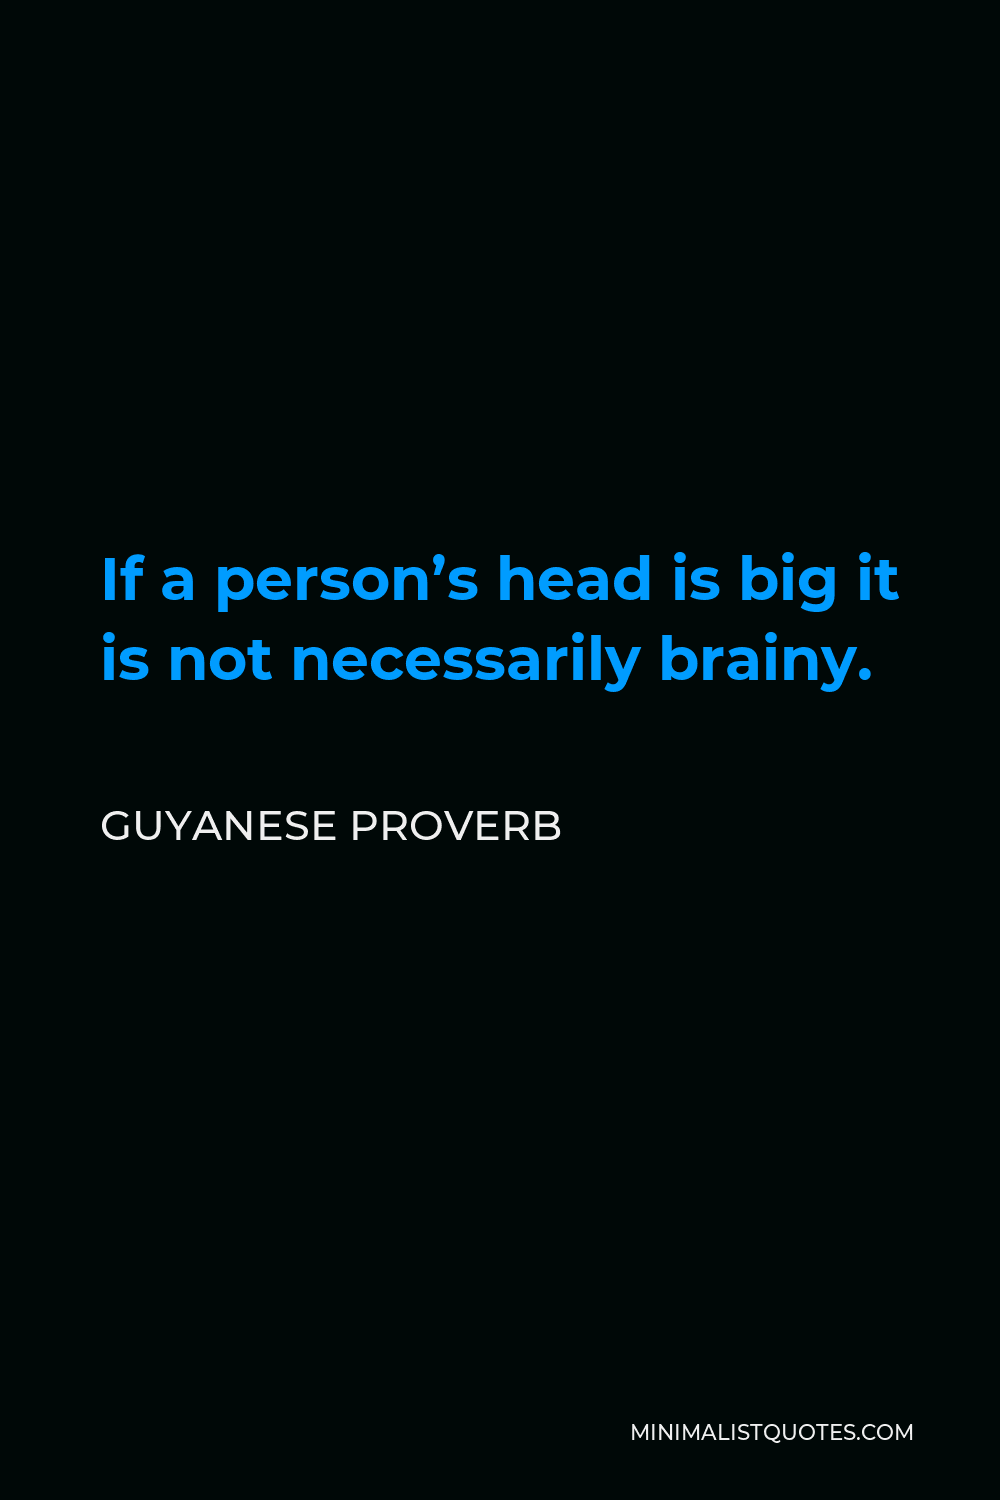 Guyanese Proverb Quote - If a person’s head is big it is not necessarily brainy.